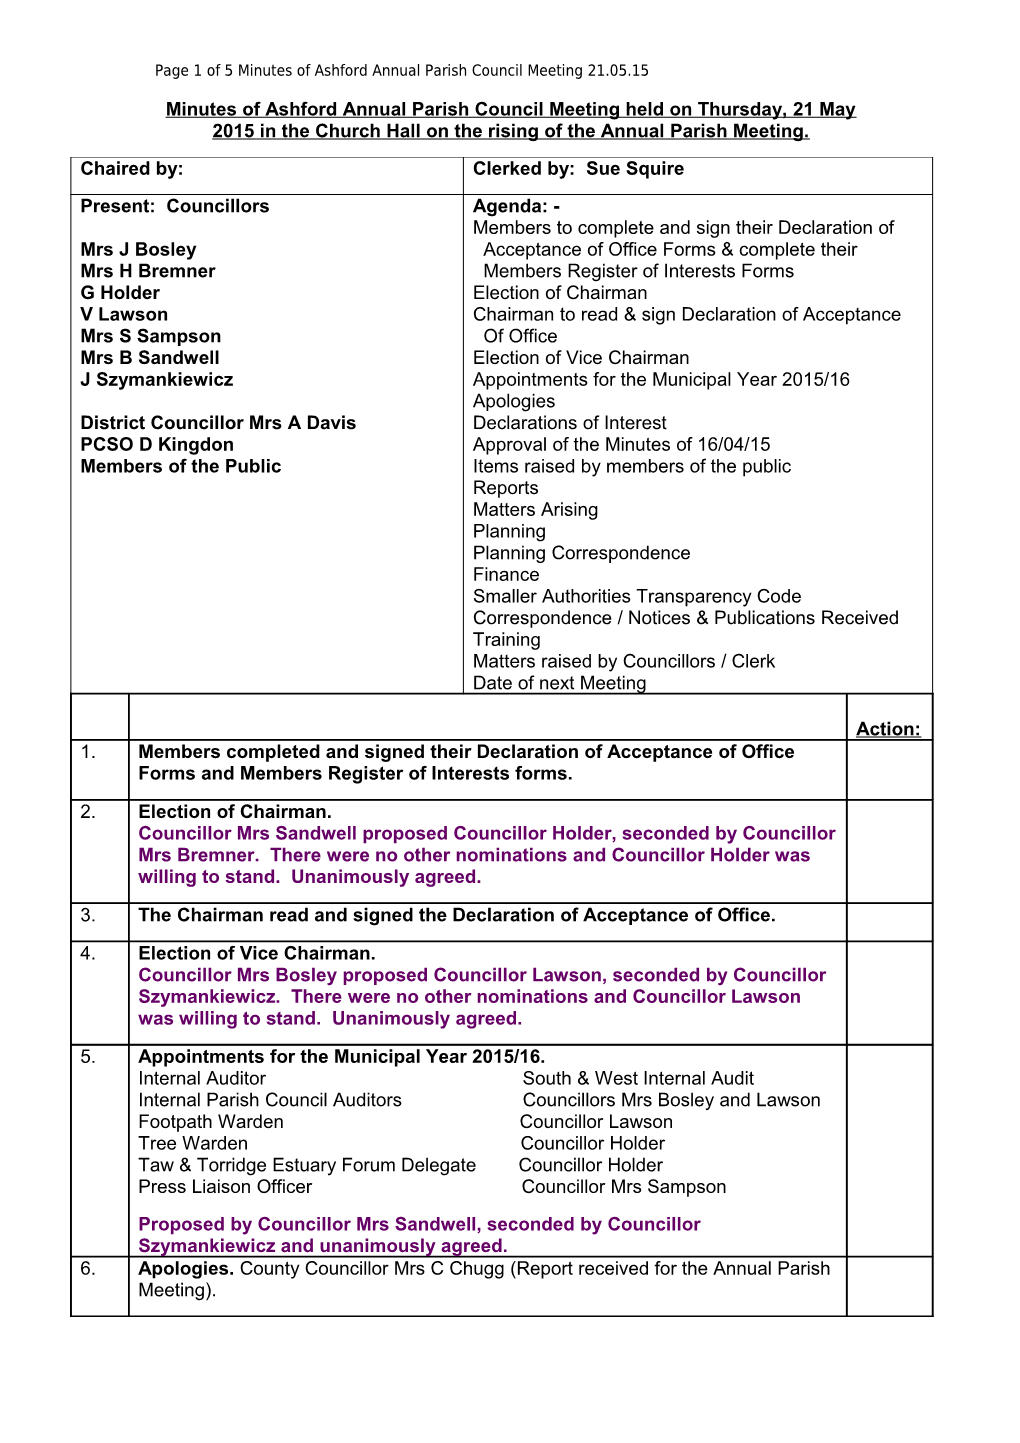 Page 1 of 1 Minutes of Ashford Annual Parish Council Meeting 21.05.15